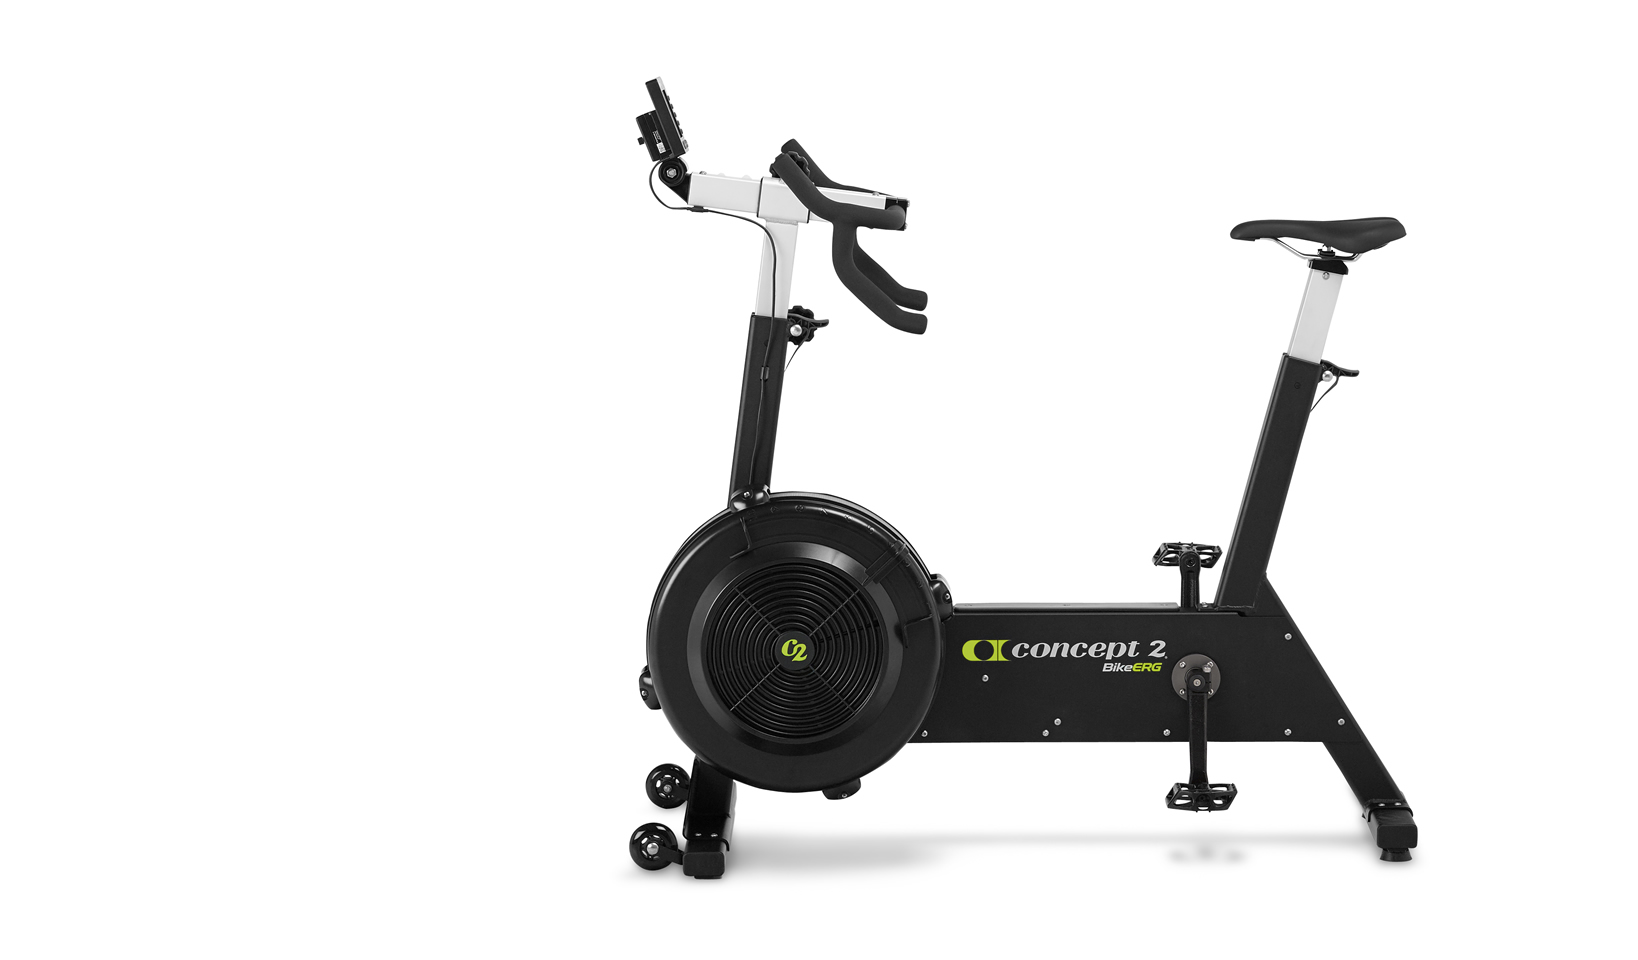 The Concept2 BikeErg, an approved option for physical fitness testing.